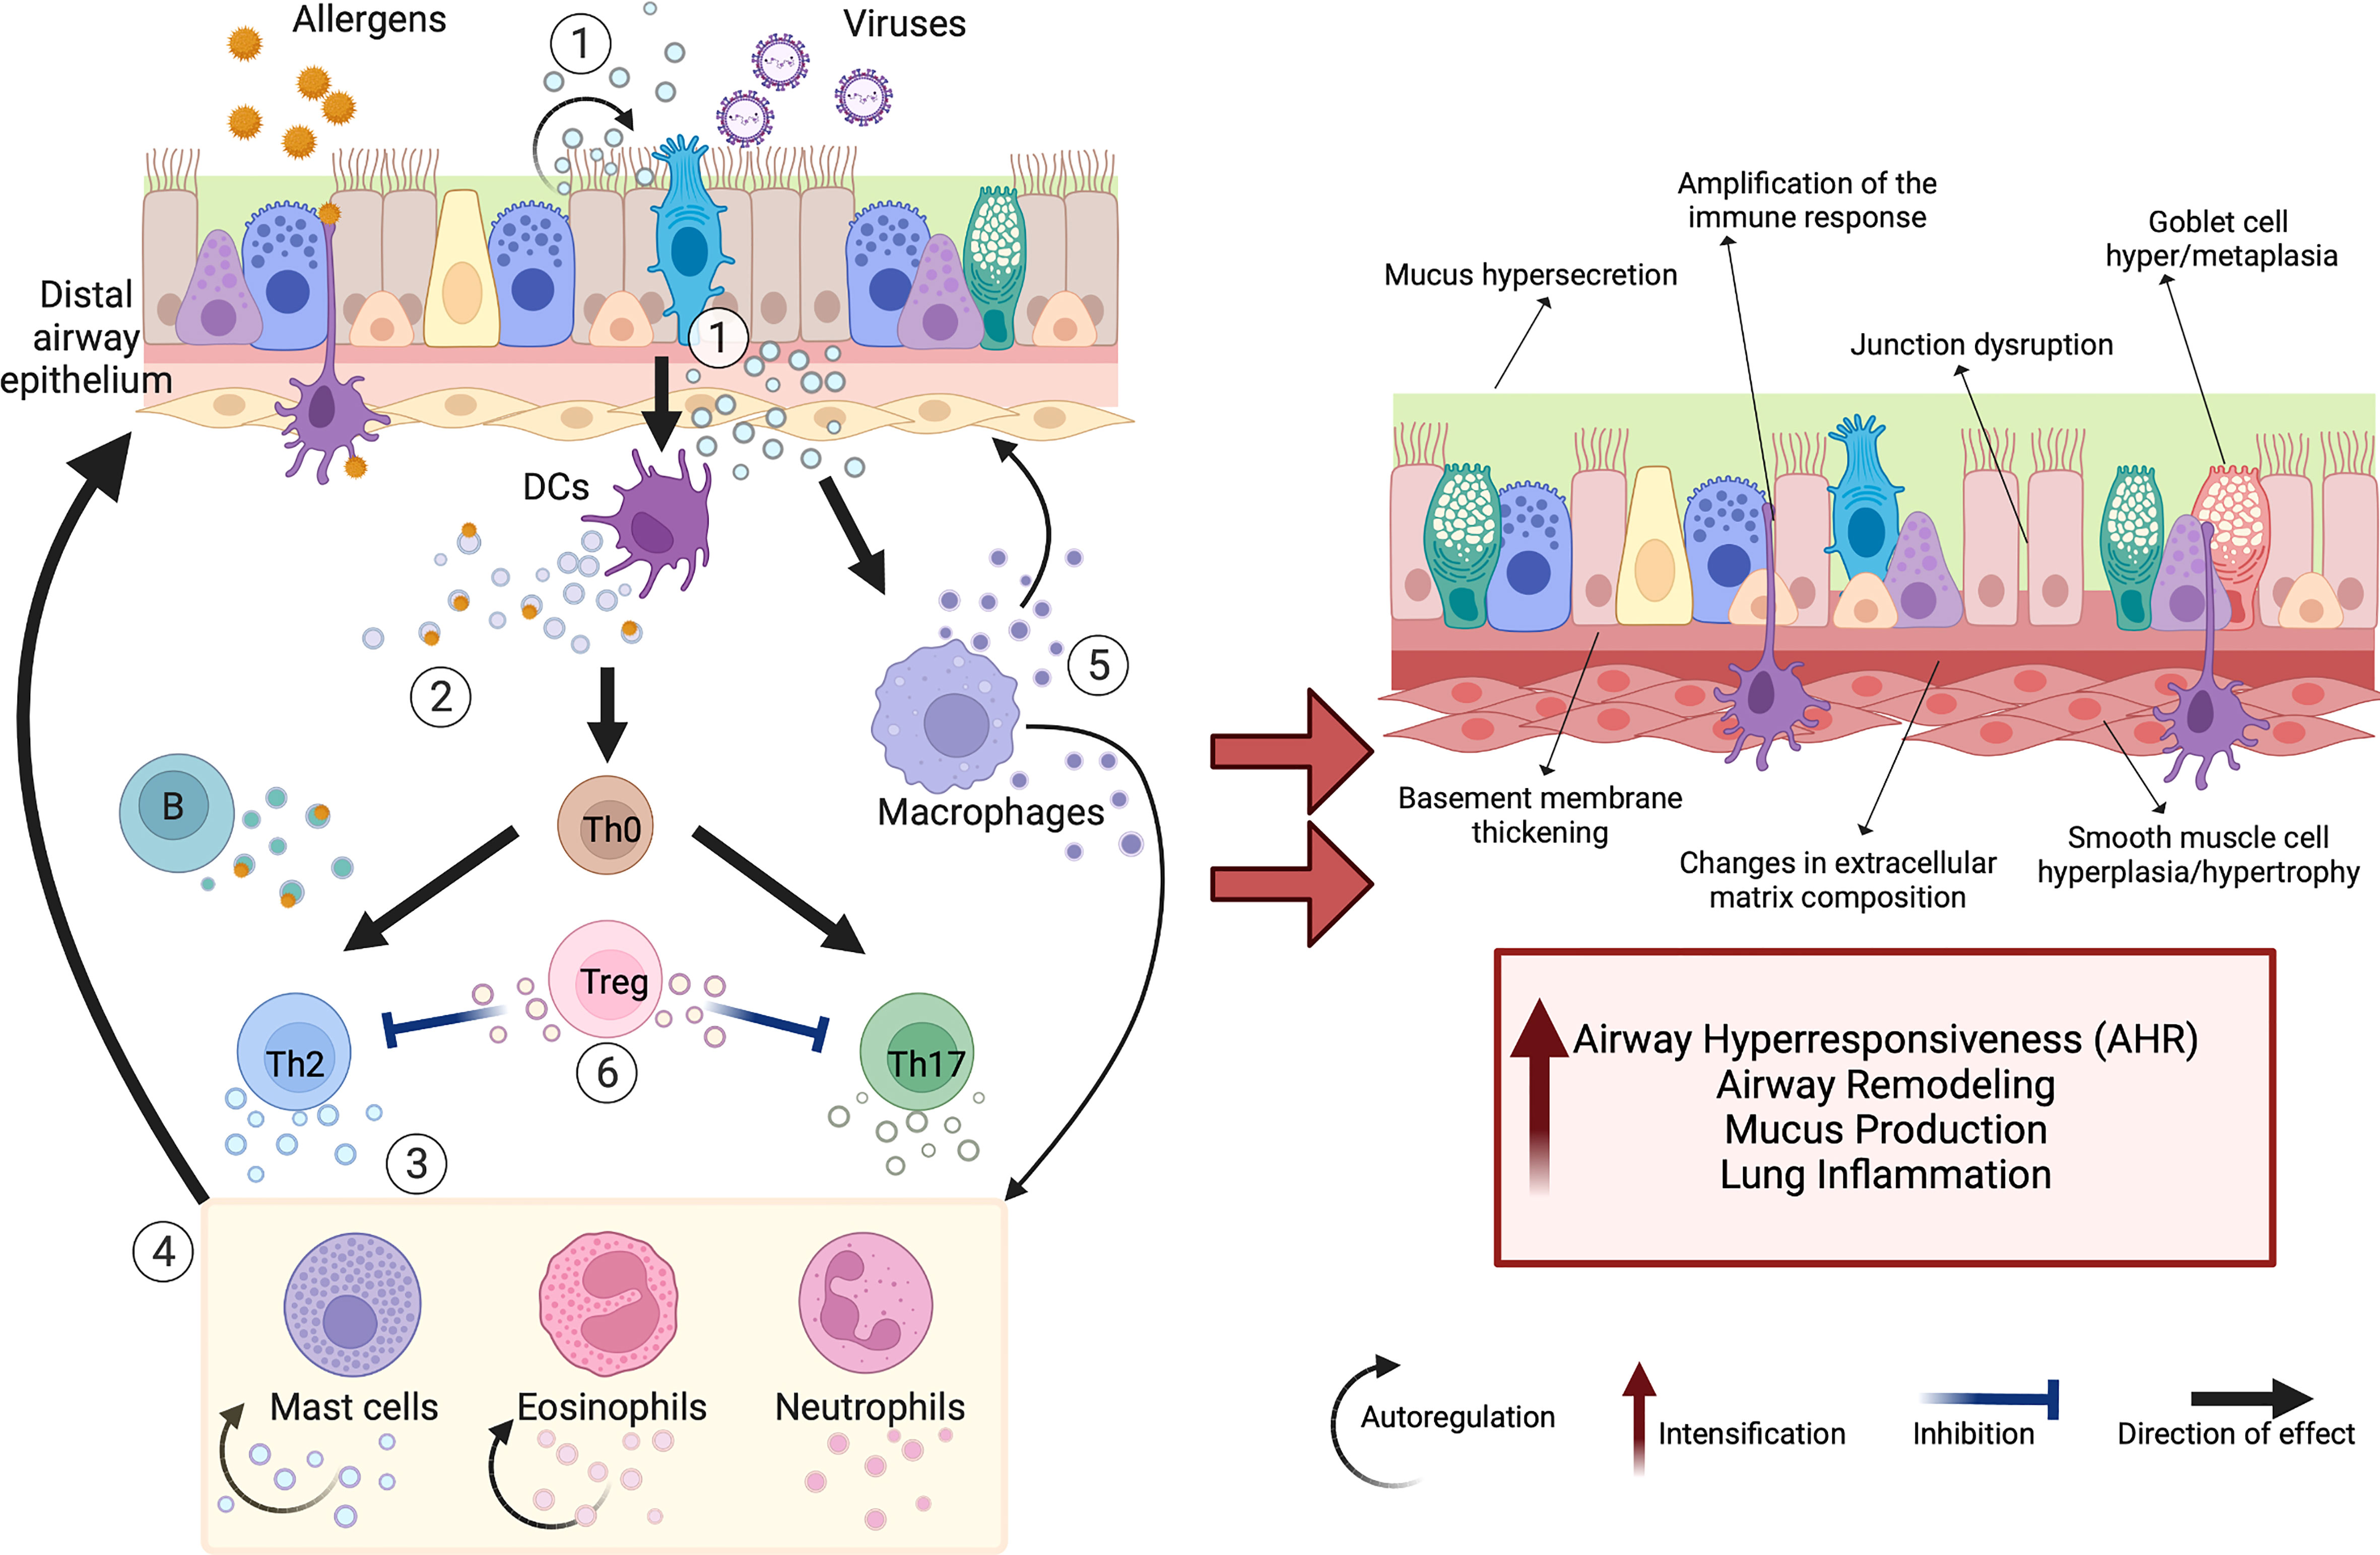 How LPS prevents or promotes development of asthma and allergic